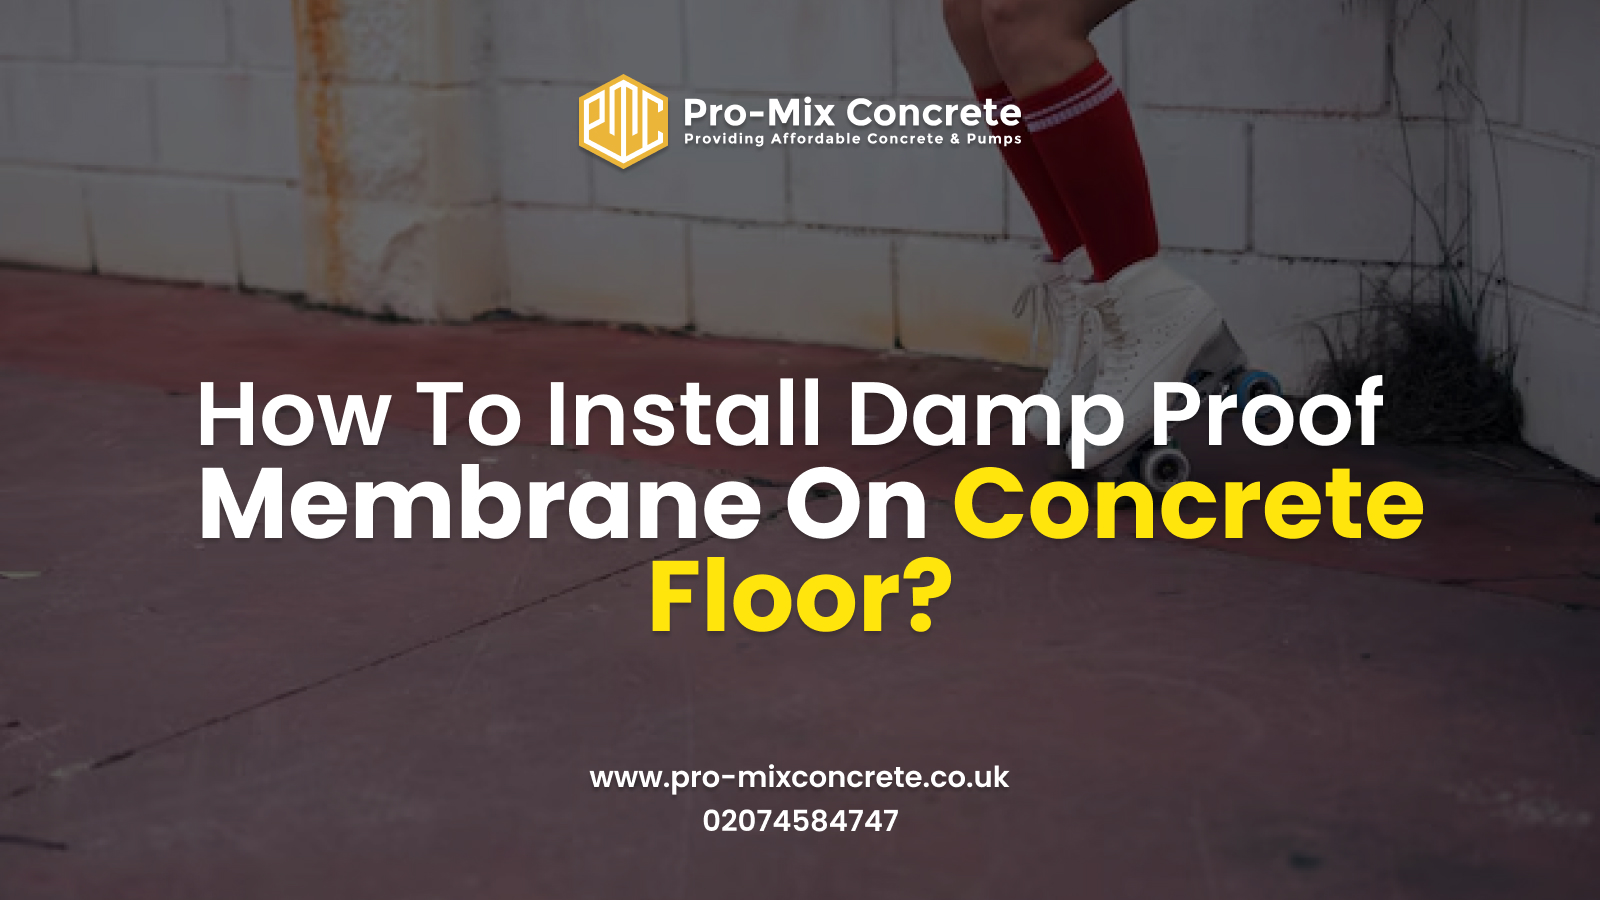 How To Install Damp Proof Membrane On Concrete Floor?